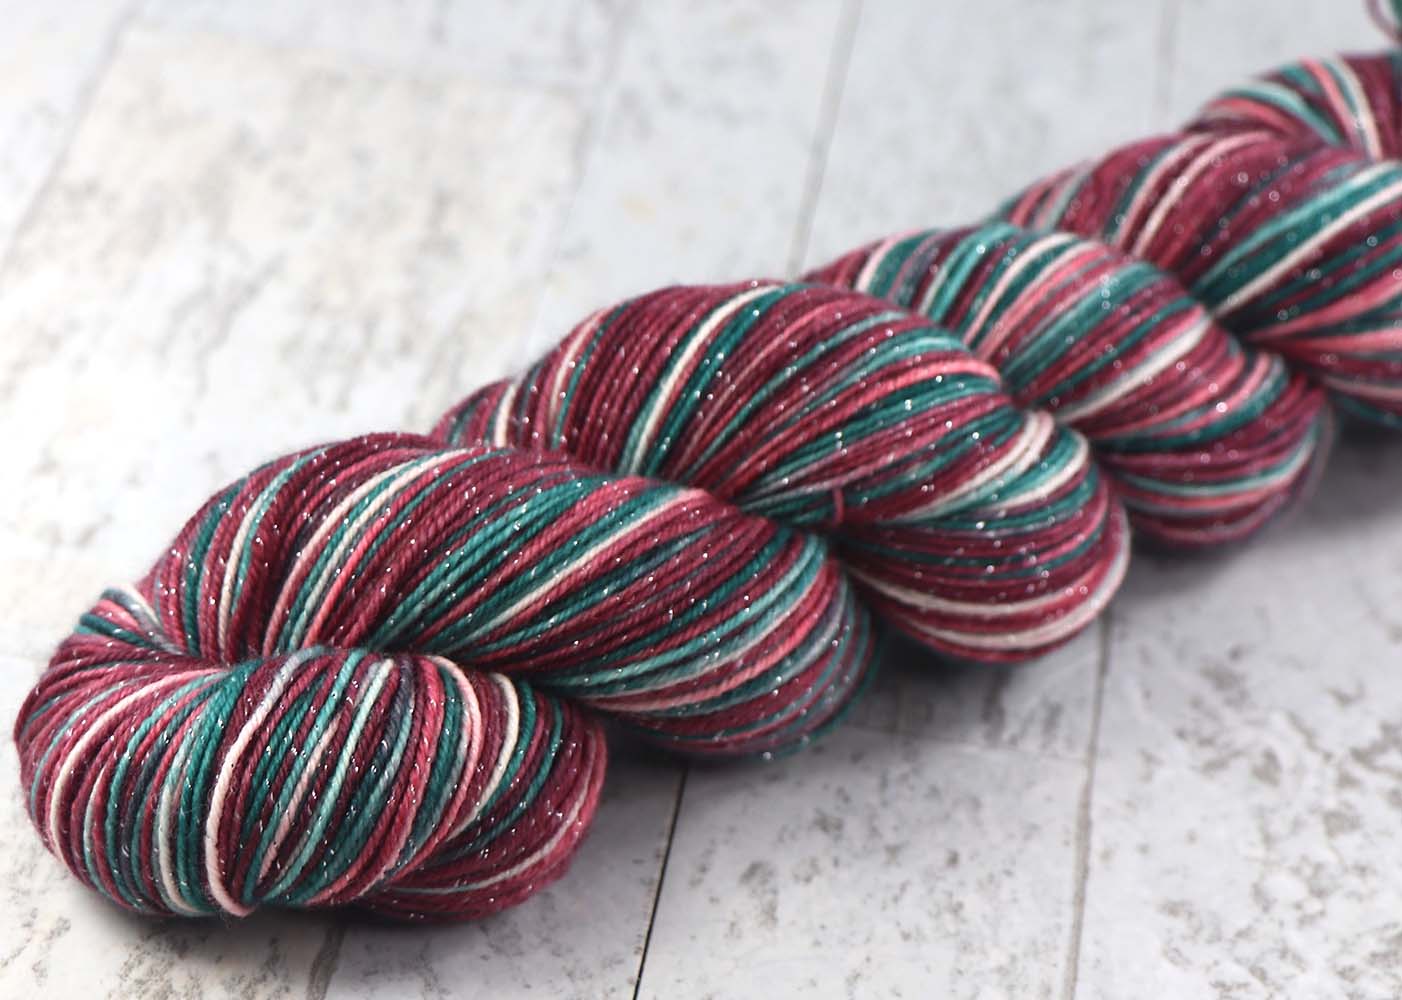 CRANBERRY CHRISTMAS: SW Merino/Lurex Sparkle - Hand dyed Variegated sock yarn